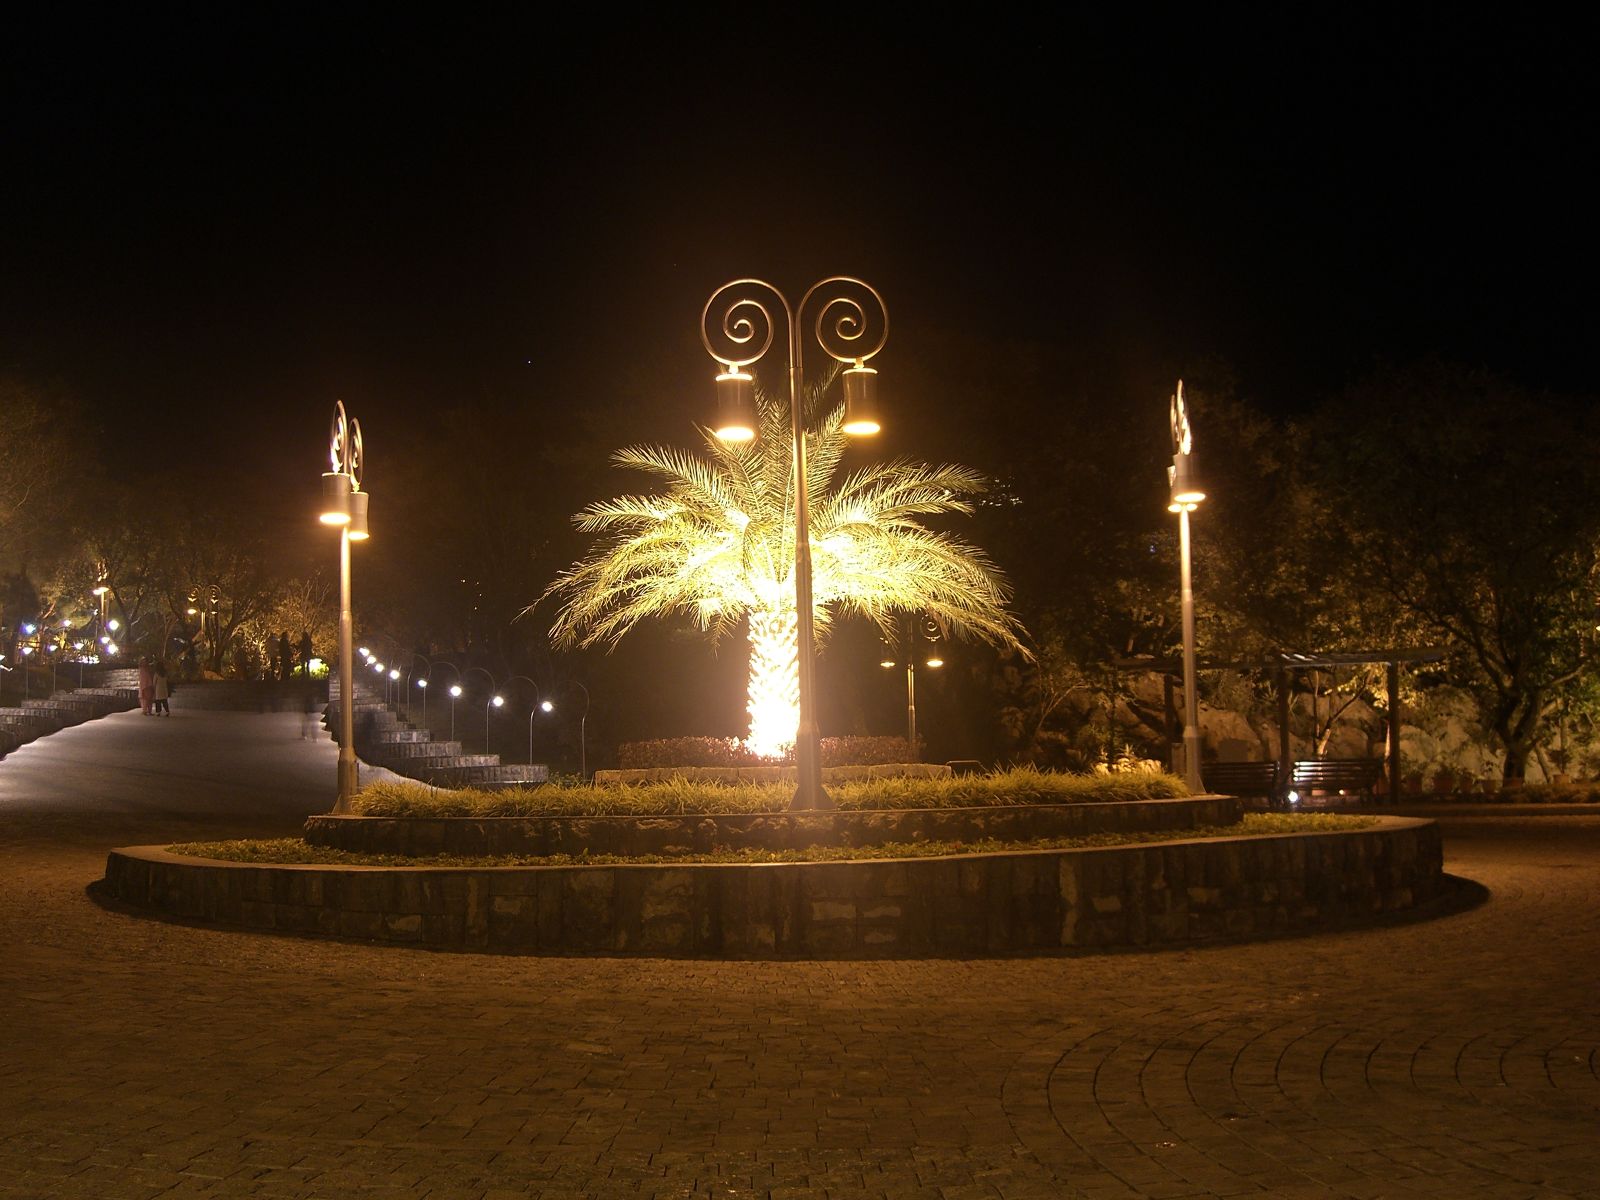 Night_view_at_a_park_in_Islamabad.jpg